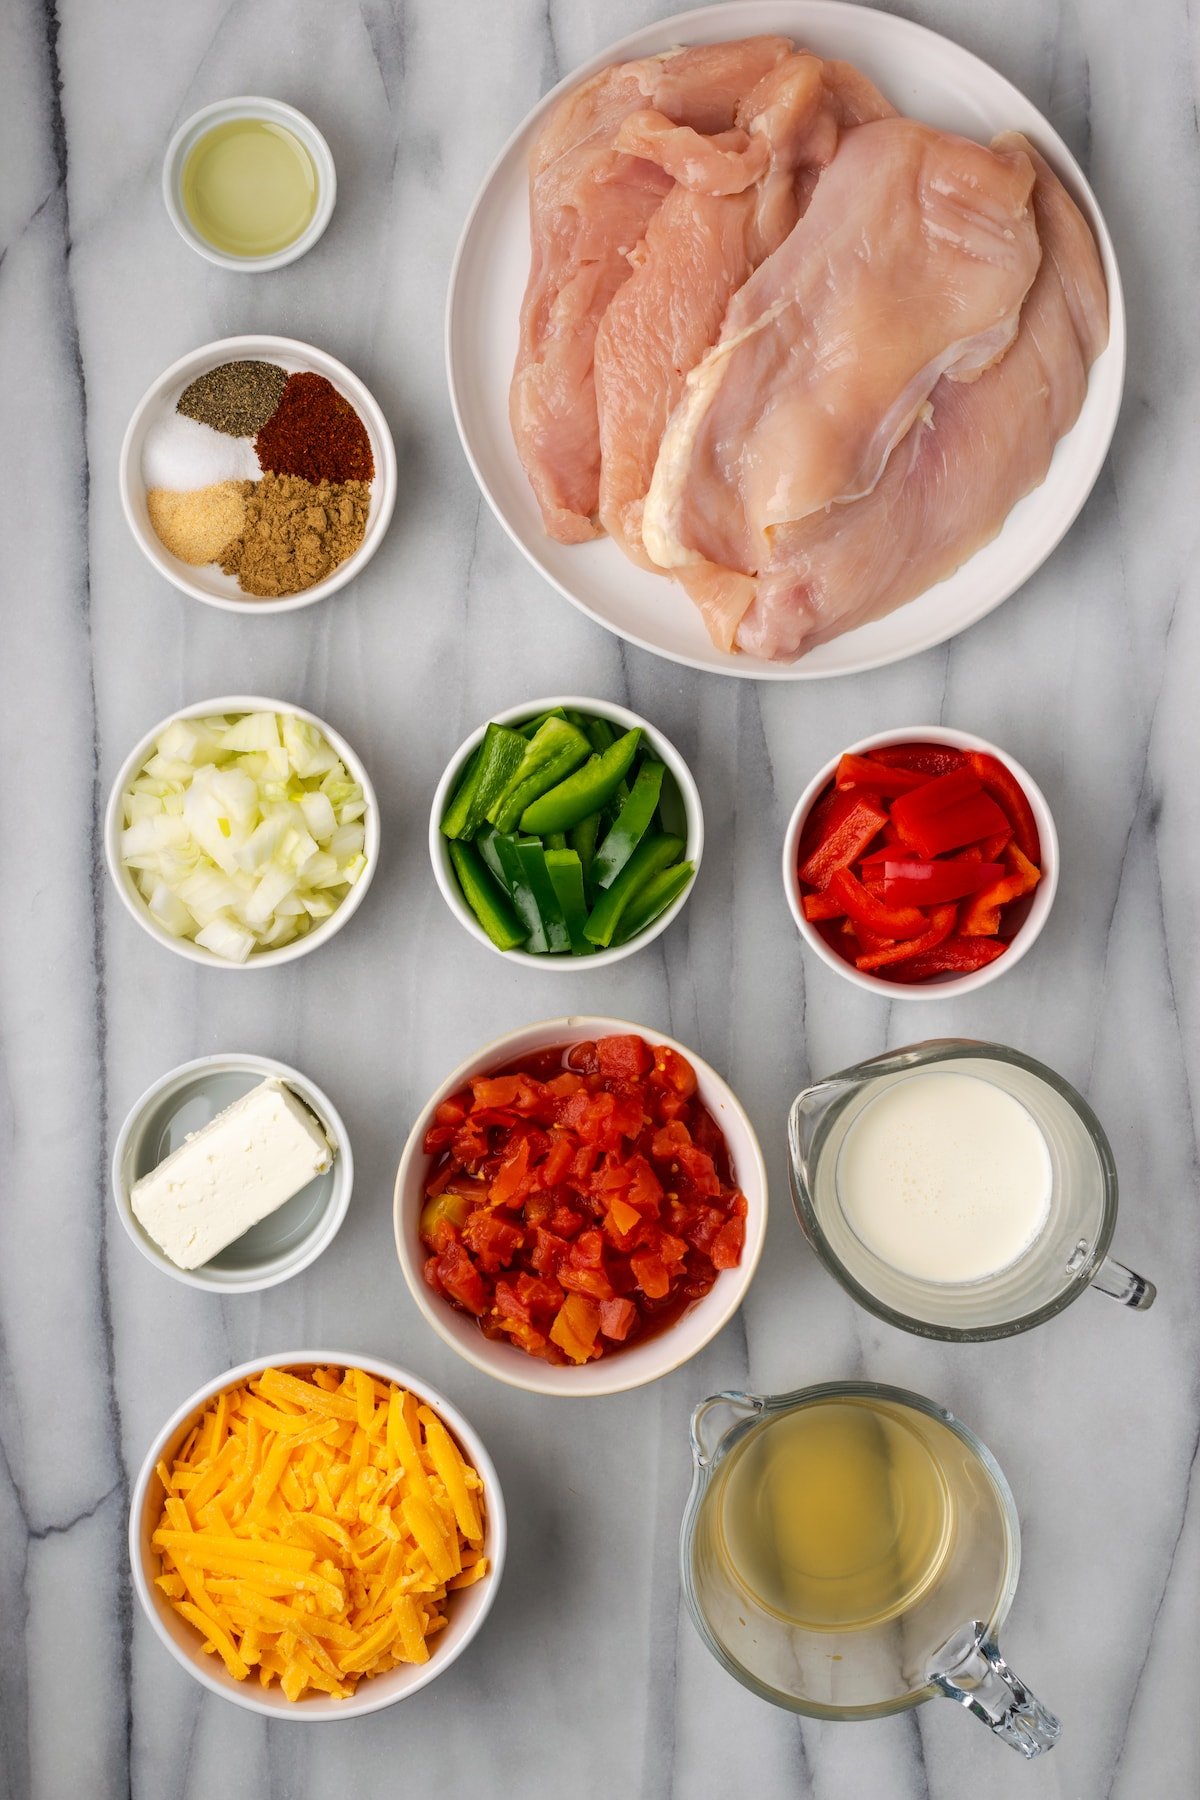 Overhead view of the ingredients needed for Santa Fe chicken: a plate of chicken breasts, a bowl of olive oil, a bowl of salt, pepper, cumin, chili powder, and garlic powder, a bowl of onions, a bowl of green bell peppers, a bowl of red bell peppers, a bowl of cream cheese, a bowl of Ro-tel, a bowl of shredded cheddar cheese, a pyrex of heavy cream, and a pyrex of chicken broth